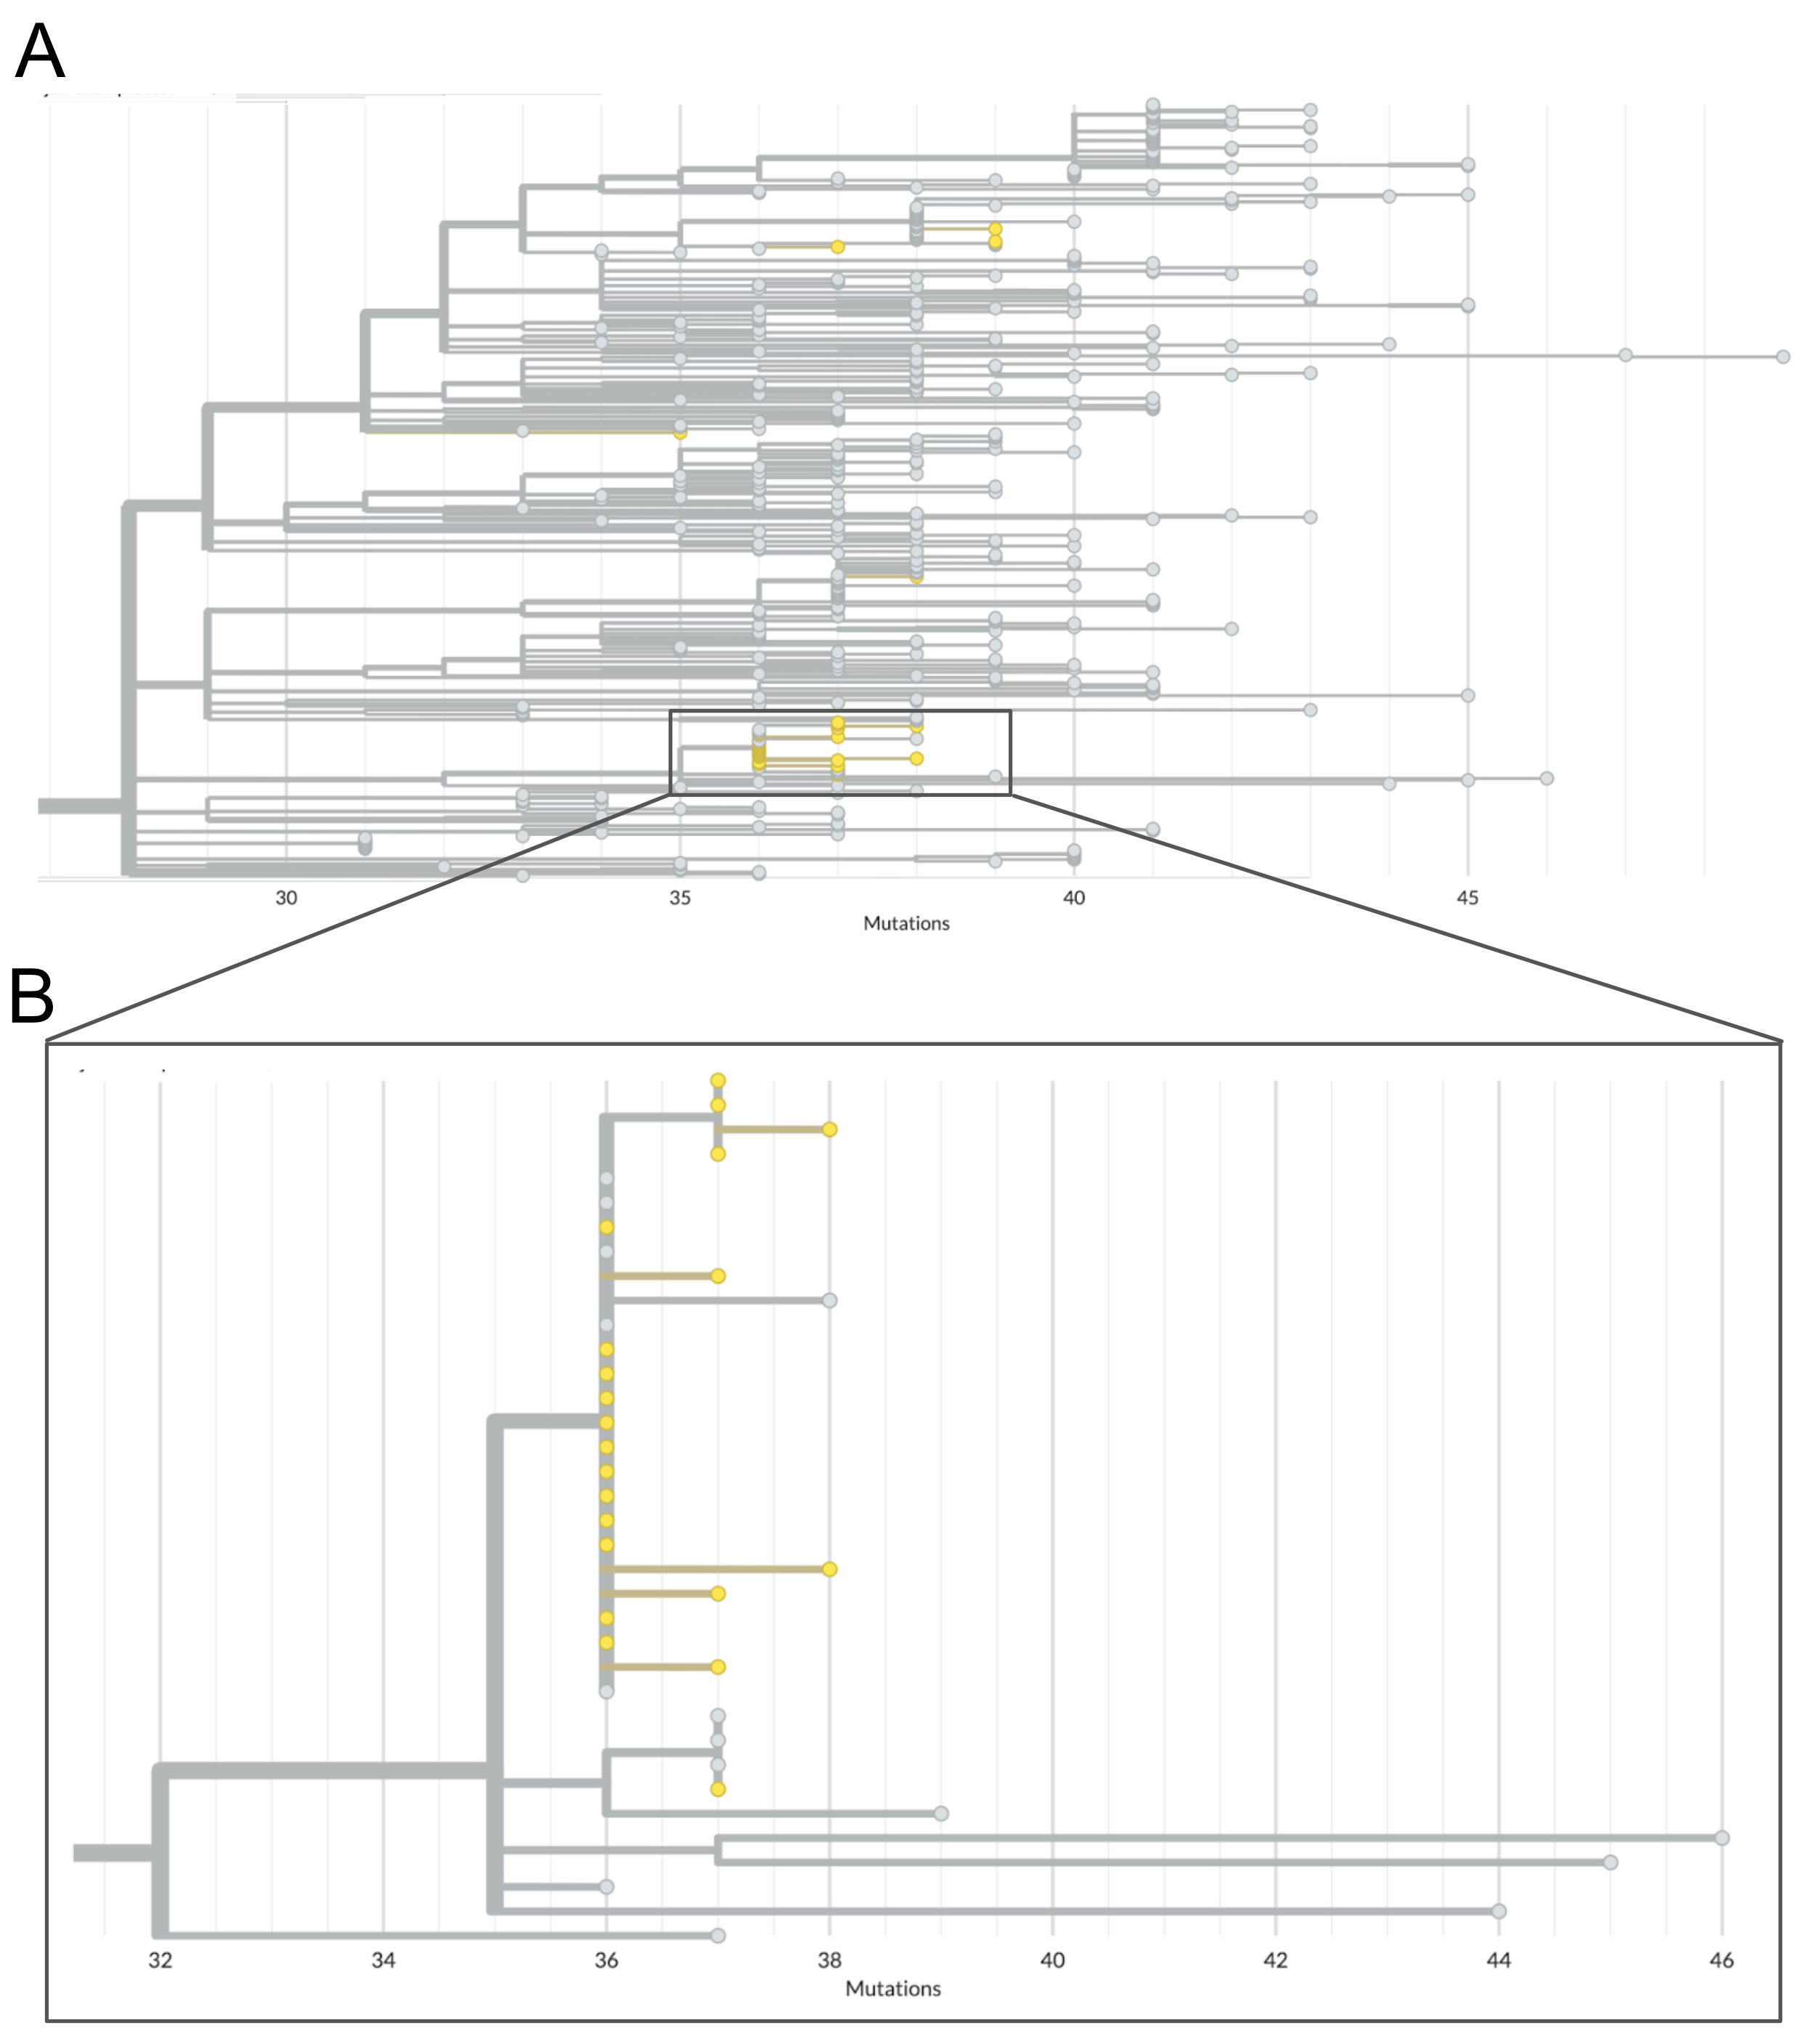 Phylogenetic tree of jail sequences and representatively-sampled contextual sequences. A) The top panel of this figure shows the clade within which all jail sequences group with other contextual sequences. Contextual sequences are shown in grey while jail sequences are coloured yellow. In this view you can see the broad distribution of some jail sequences across the entire clade, as well as one cluster of jail sequences which appear closely genetically-related. B) A zoomed-in view of the clade which clusters many jail sequences together. Many of the jail sequences within this cluster have identical genome sequences, and therefore appear stacked vertically along the root node of the outbreak clade. We see other jail sequences within this cluster that appear to have one or two additional nucleotide mutations.